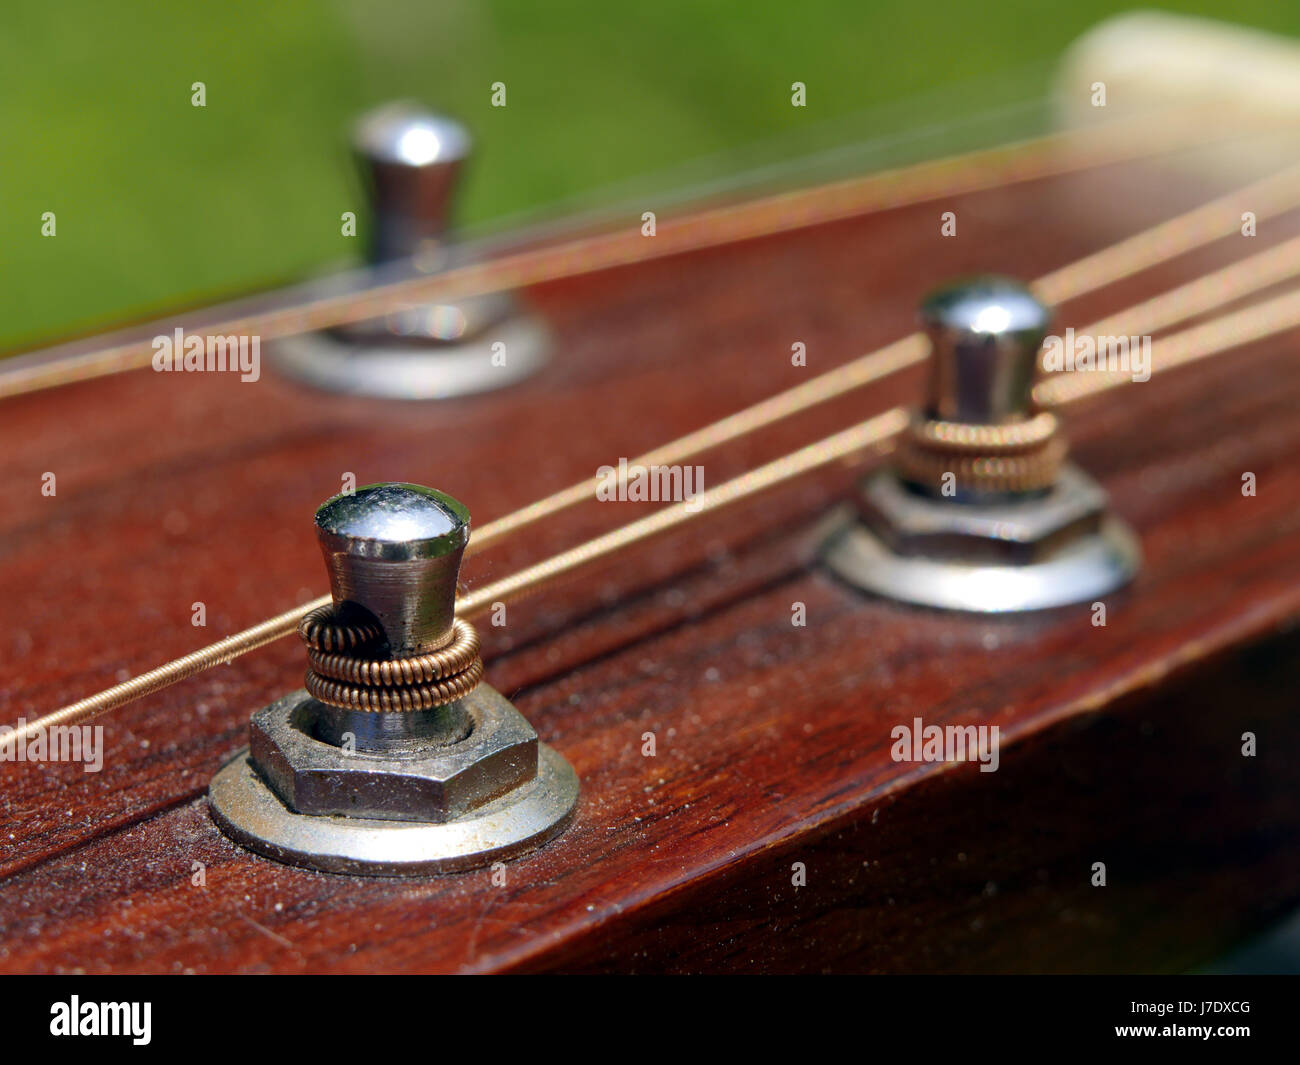 Close up detail of acoustic guitar strings and fittings Stock Photo